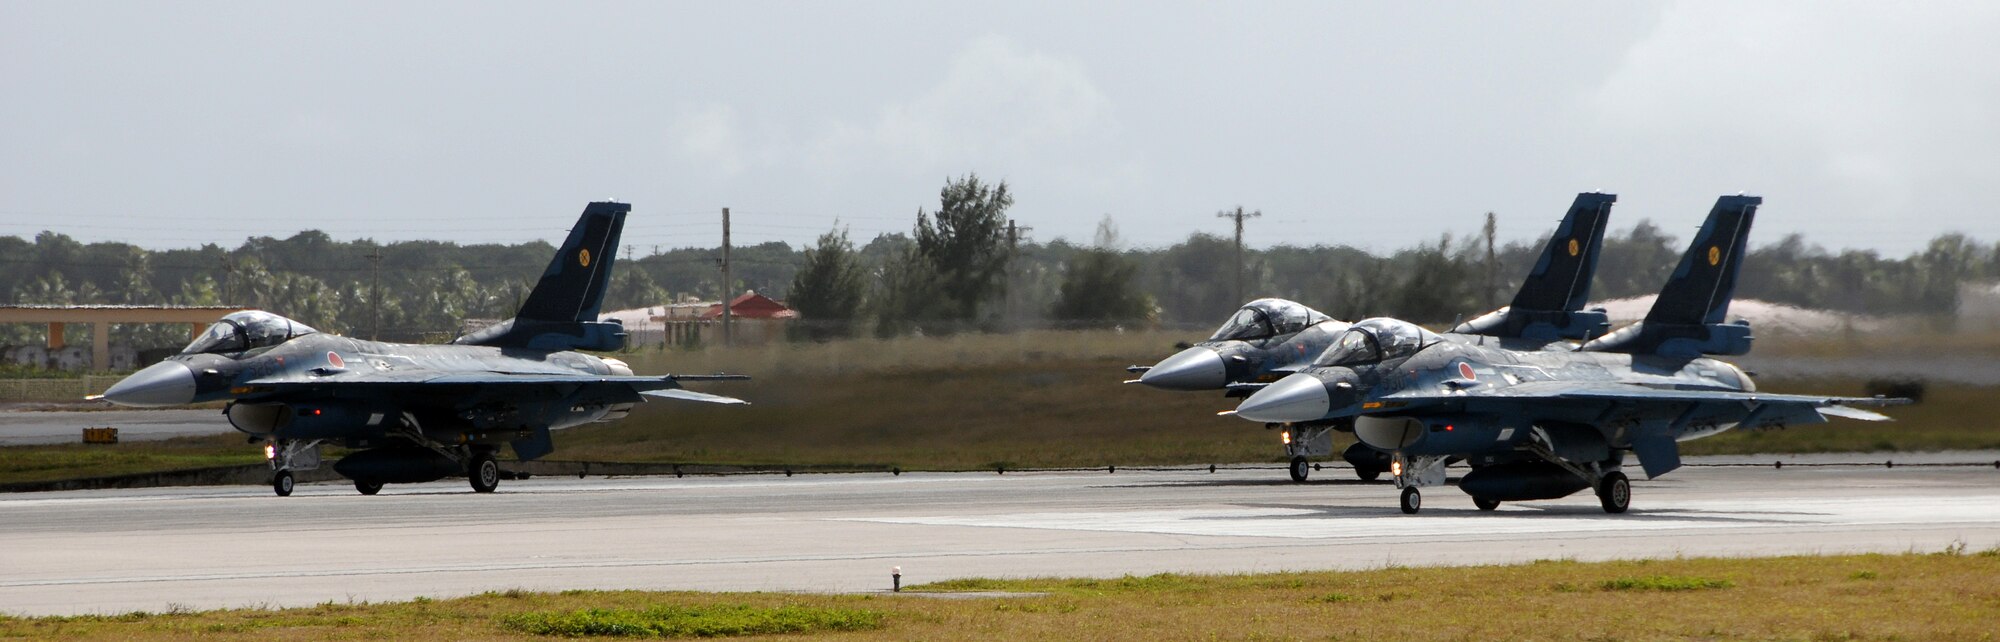 ANDERSEN AIR FORCE BASE, Guam - Japan Air Self Defense Force F2-X's line up for take-off here during an exercise for Cope North Feb. 5. The exercise has been in the planning stages for several months and bears no connection to any real-world events. This will be the tenth time the United States and Japan have held a Cope North exercise on Guam, and it will be the fourth time that the JASDF will use live ordinance.(U.S. Air Force photo by Airman 1st Class Courtney Witt)(released)

